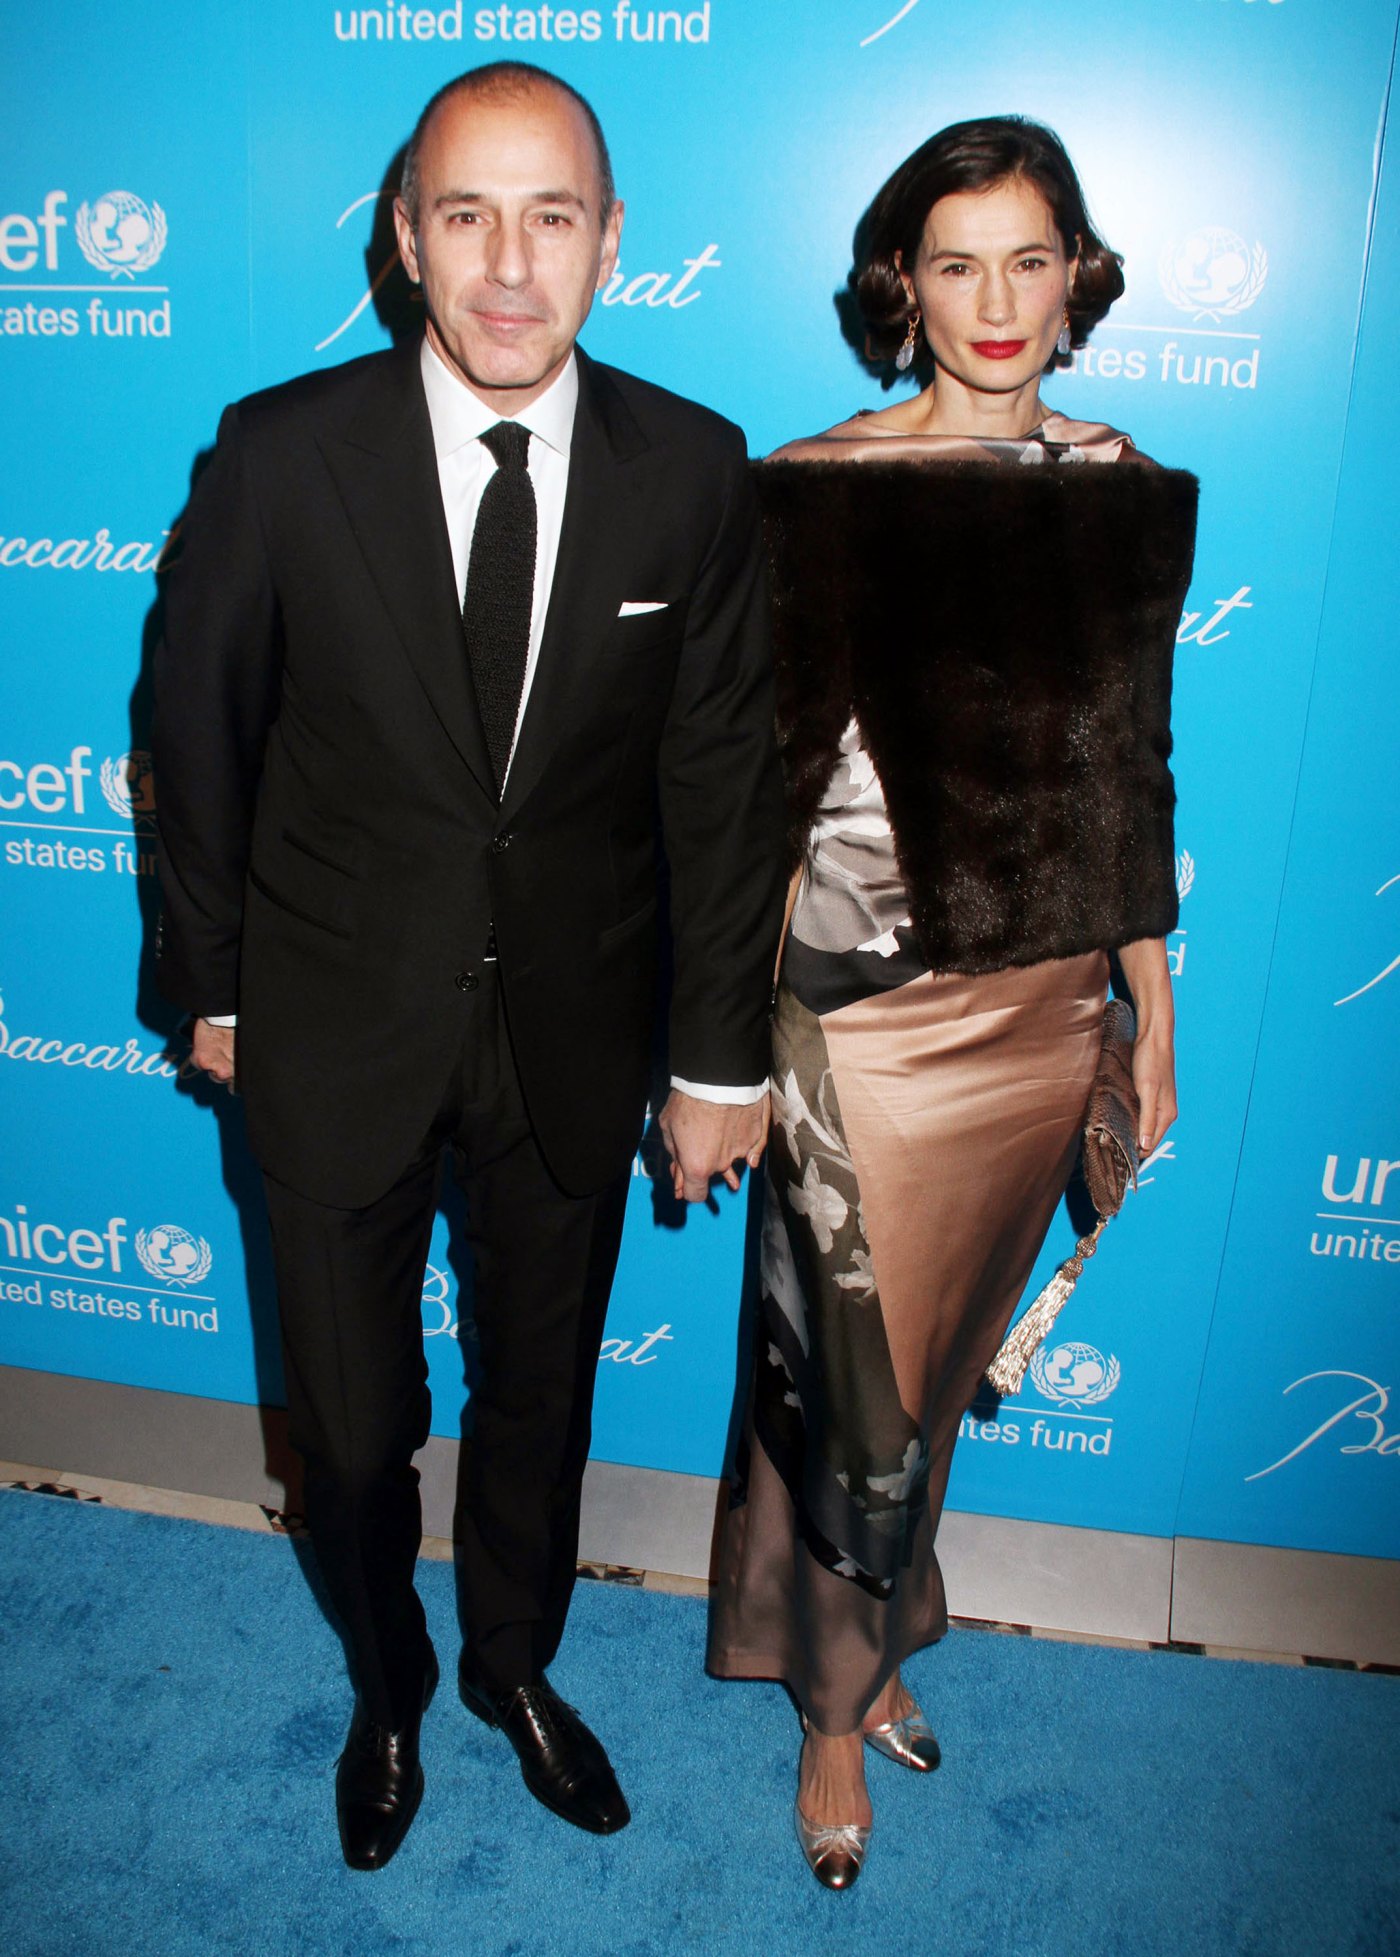 Matt Lauer ‘Furious’ He May Have to Pay Annette Roque $50 Million in ...